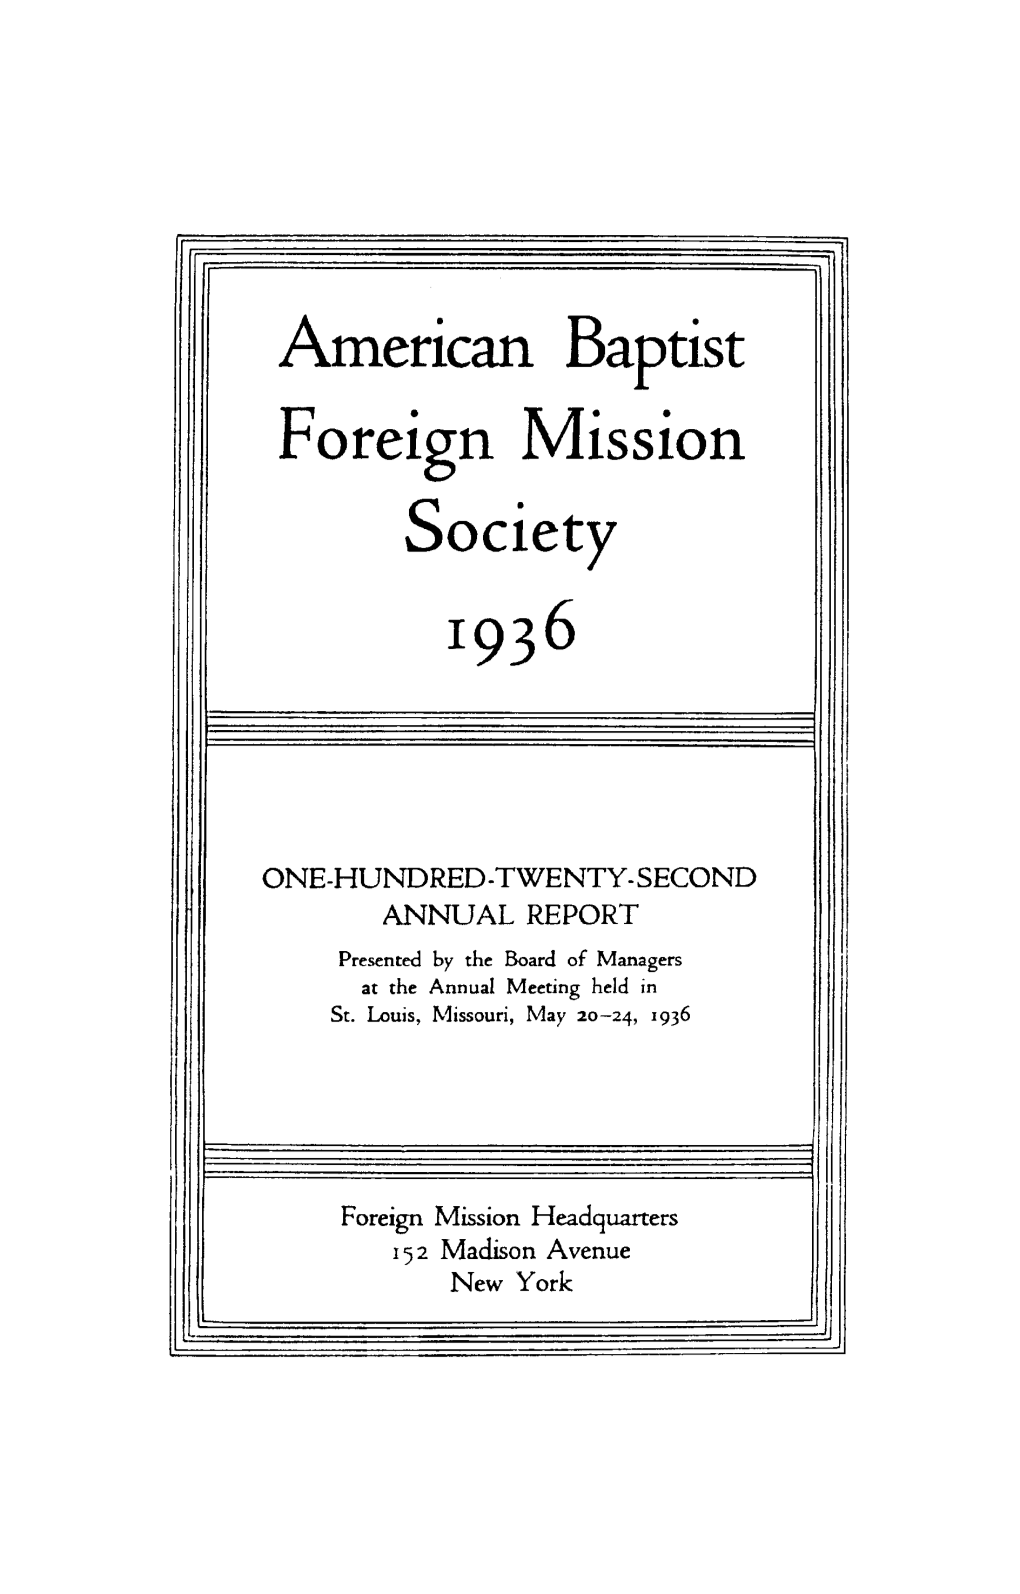 American Baptist Foreign Mission Society 1936